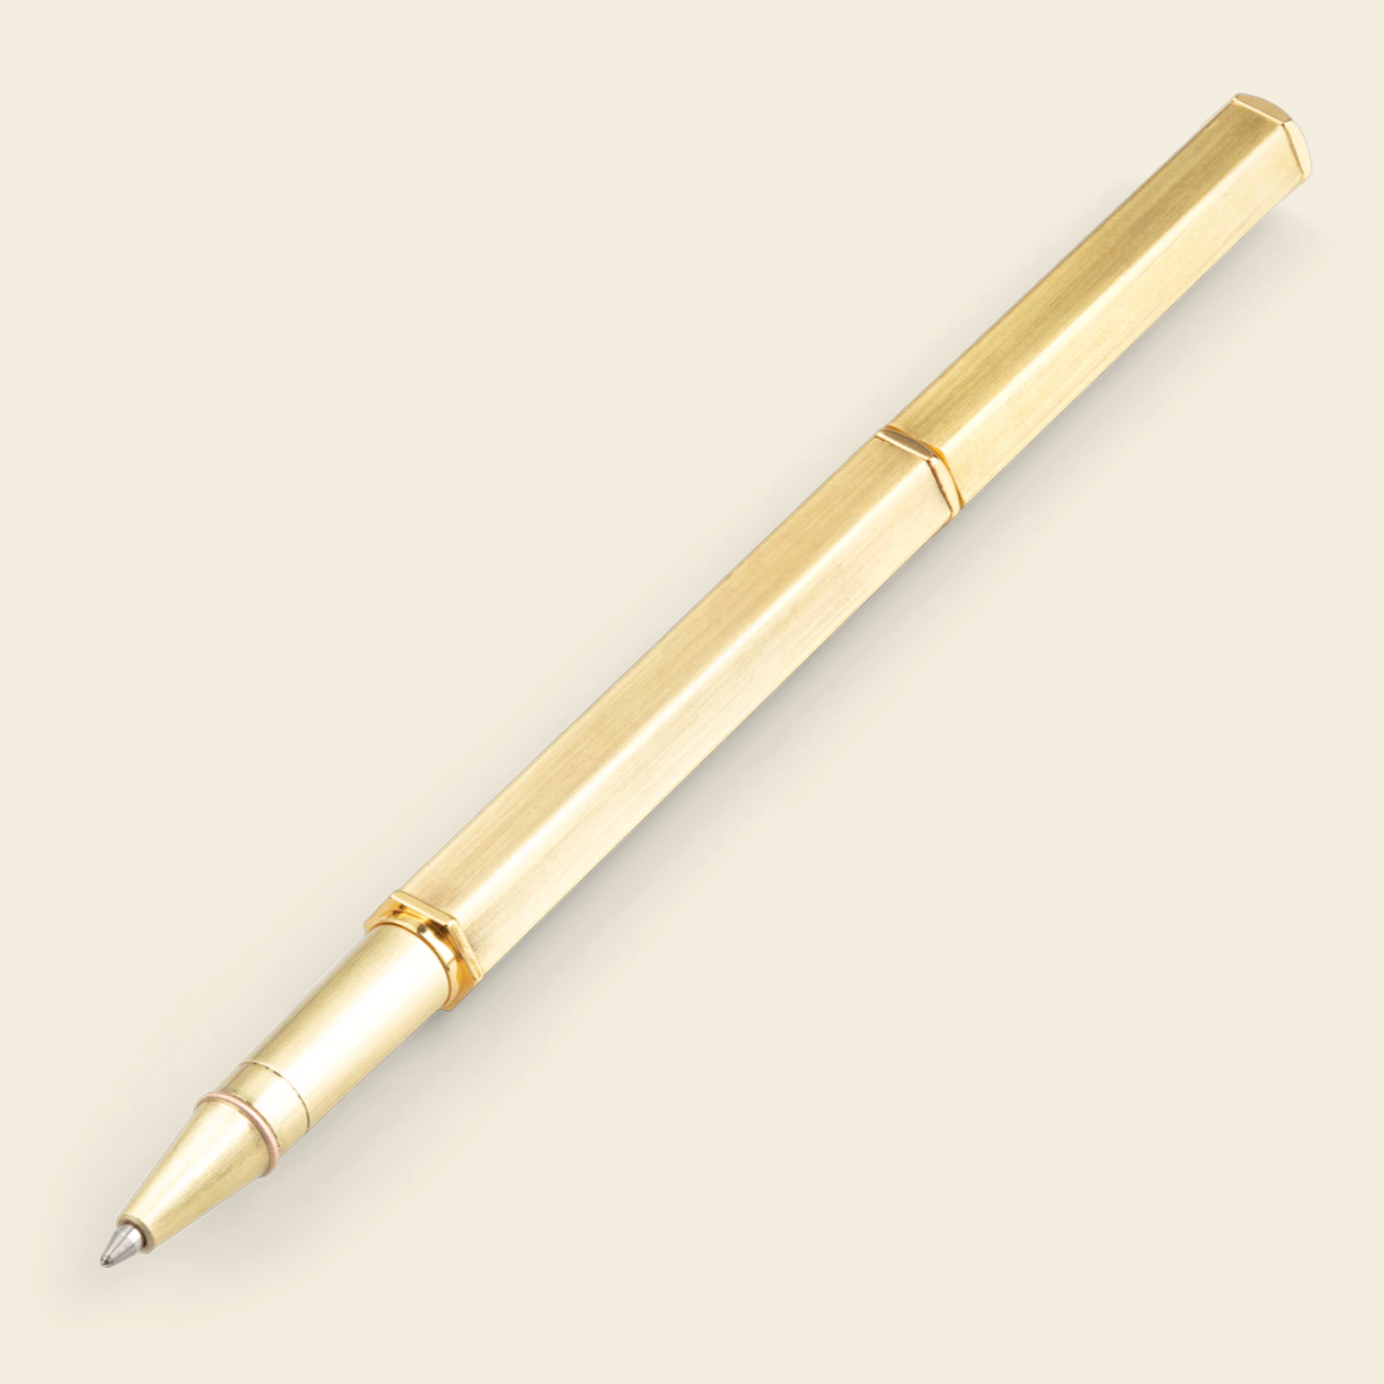 Classic Rollerball Pen - Gold